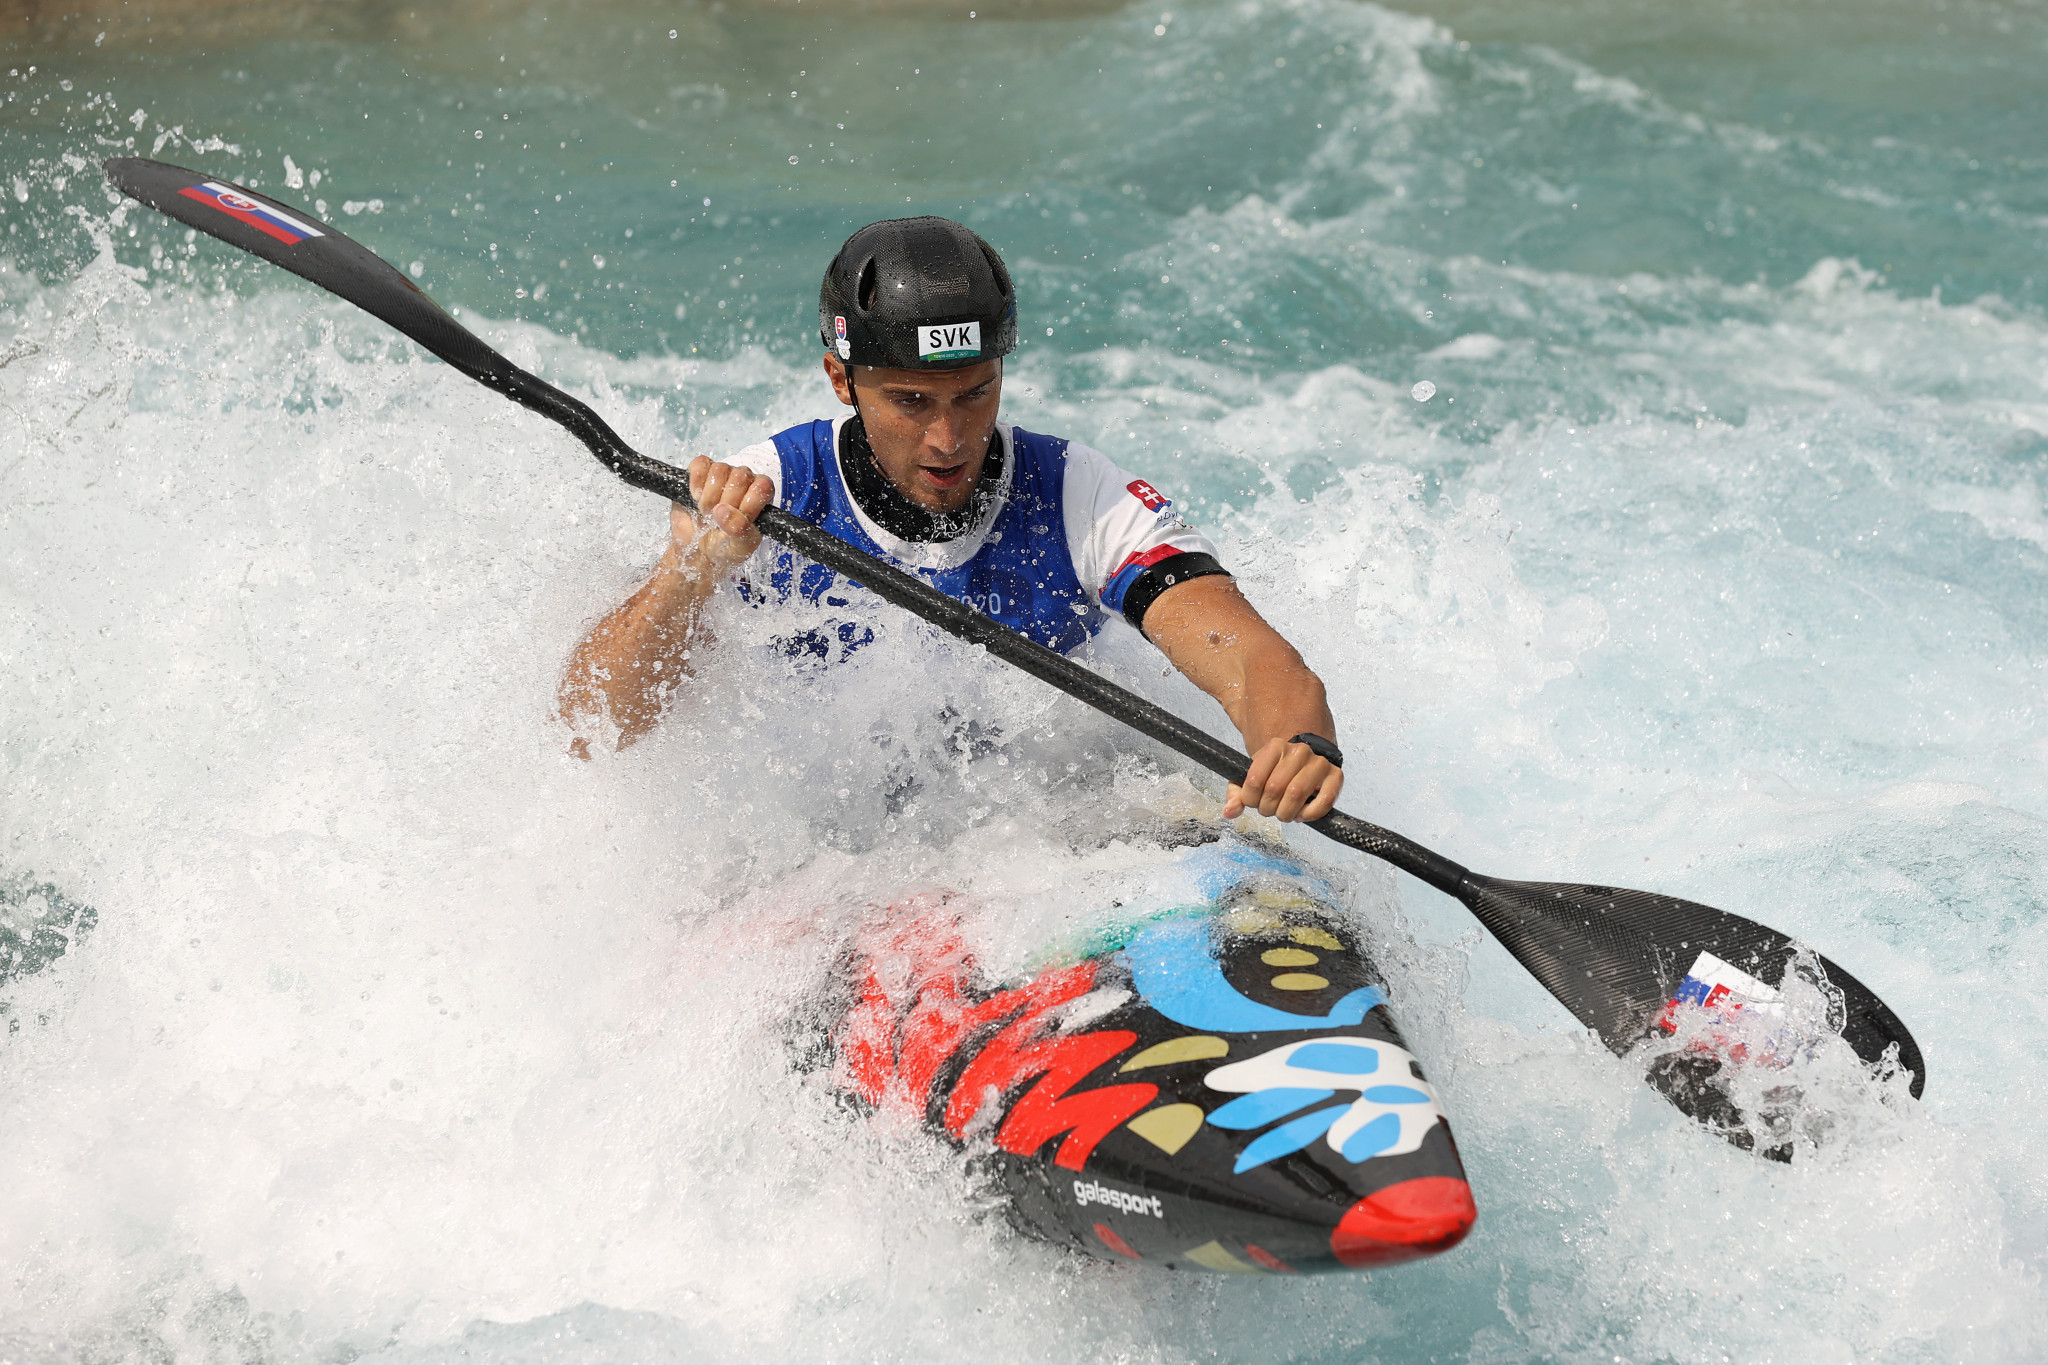 Jakub Grigar will be hoping to build on his Tokyo 2020 silver medal in the 2021 ICF Slalom World Cup in La Seu in Spain ©Getty Images